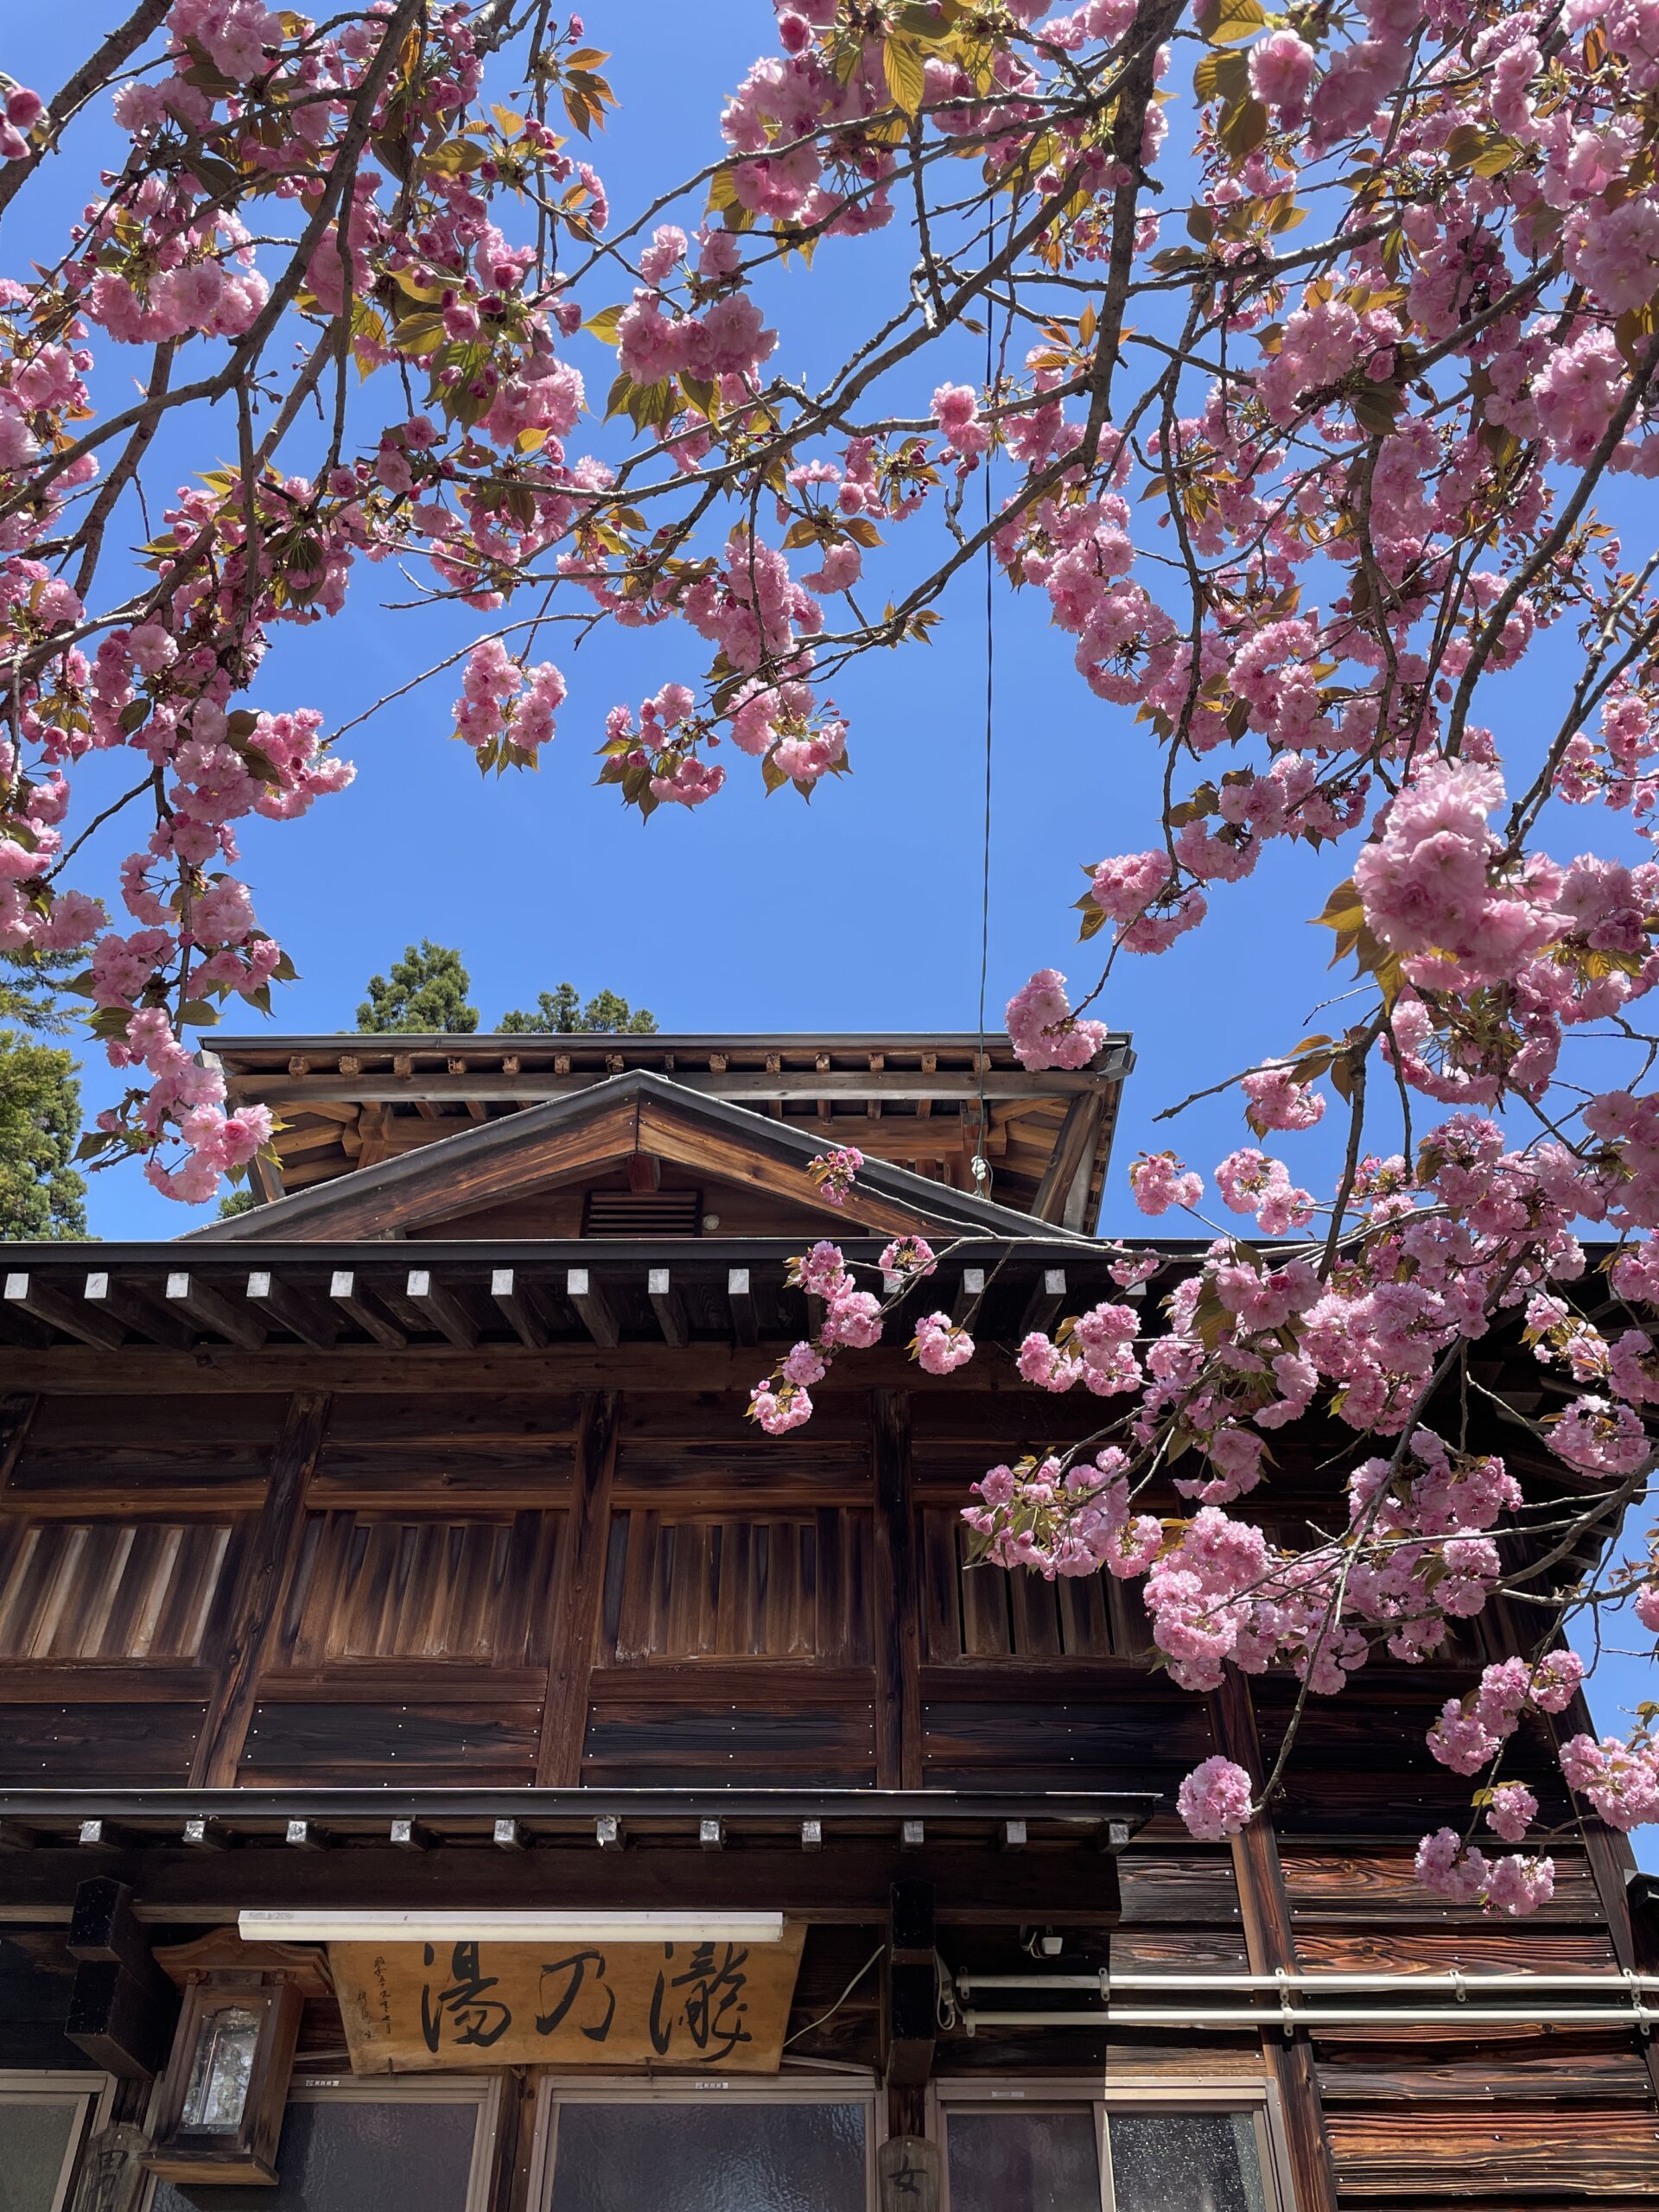 Cherry Blossom just outside of one of the iconic Onsens in Nozawa